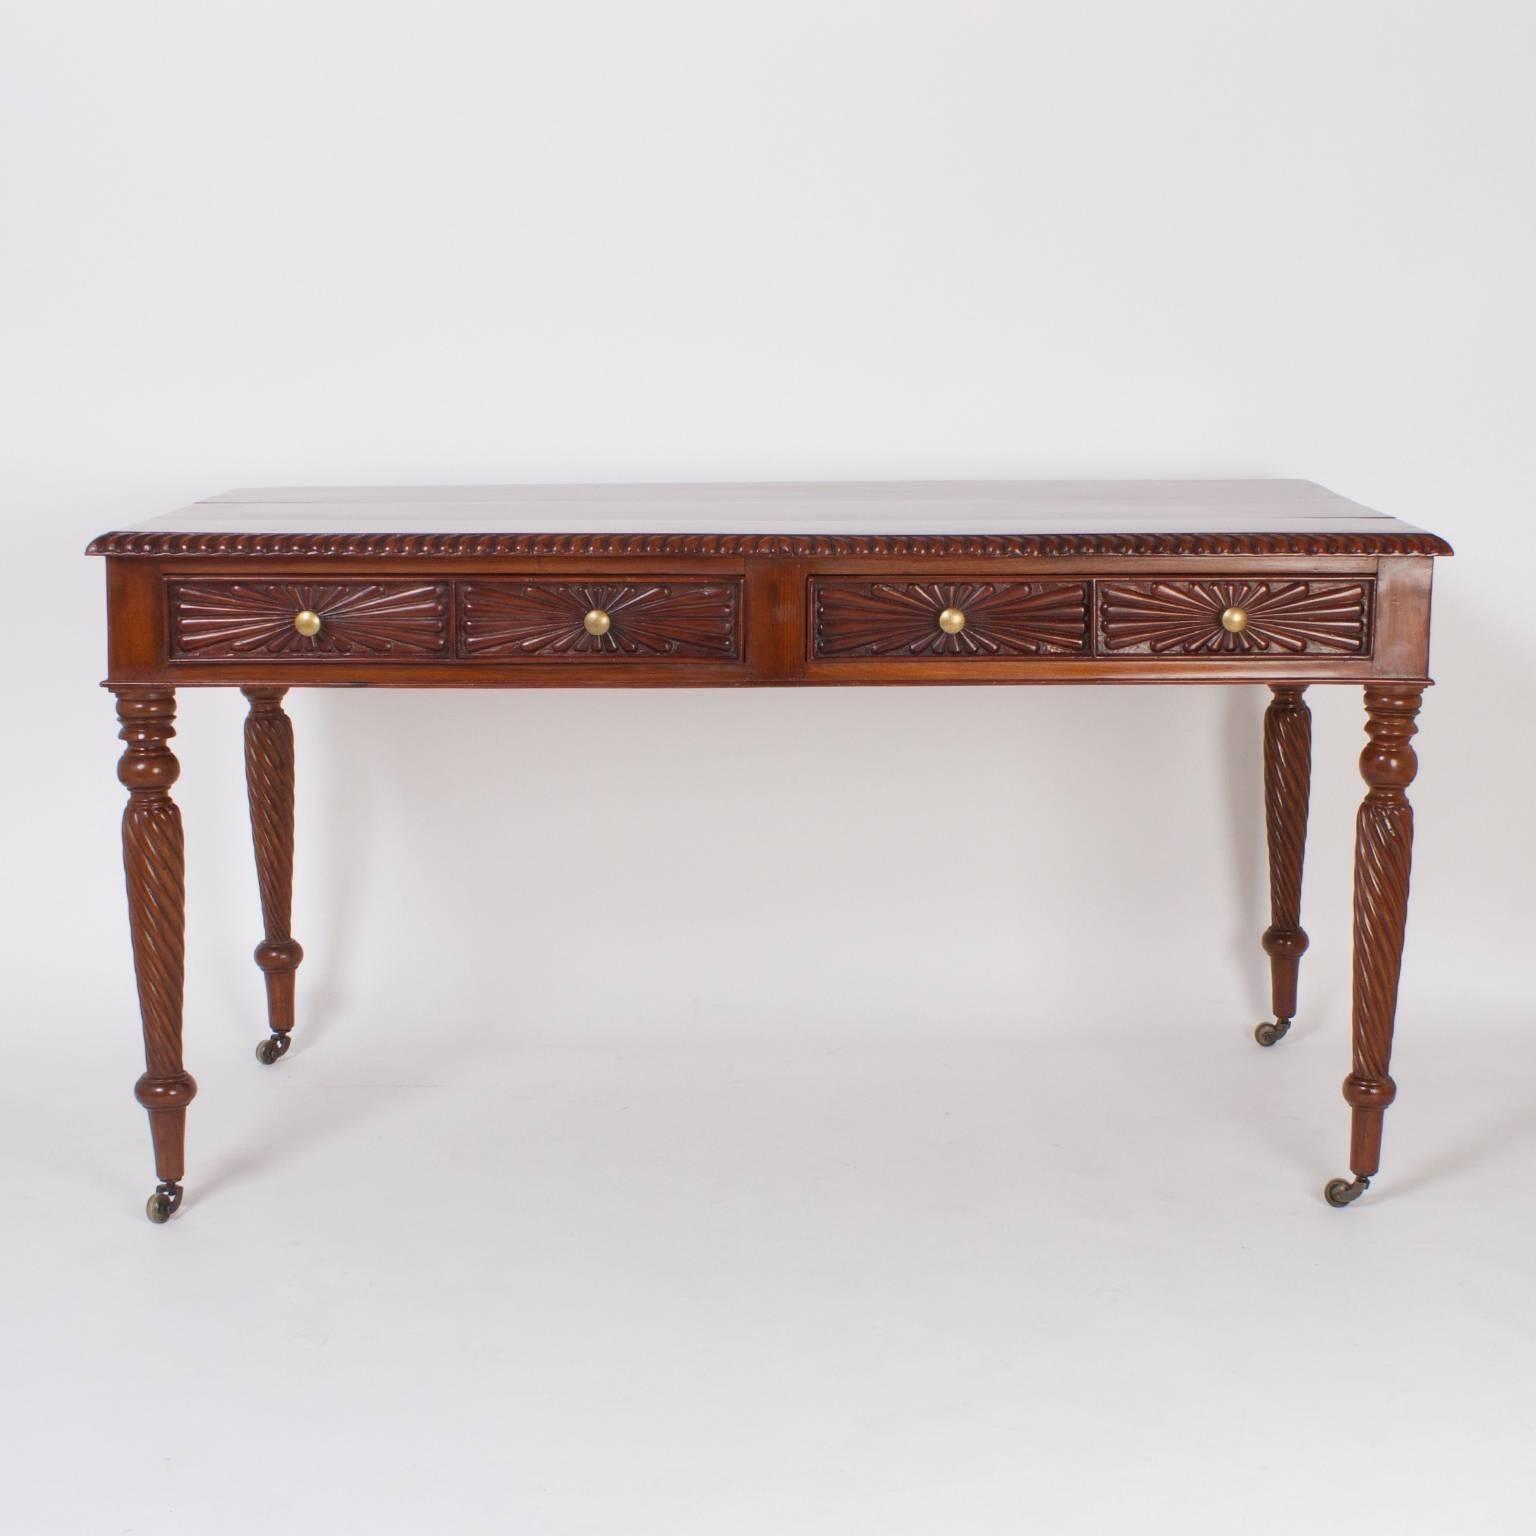 Antique, British Colonial writing desk or library table from India, crafted with well grained mahogany in a handmade pegged construction. Featuring a beaded cornice, two carved drawer fronts, and turned legs on casters. Cleaned, waxed, and ready for